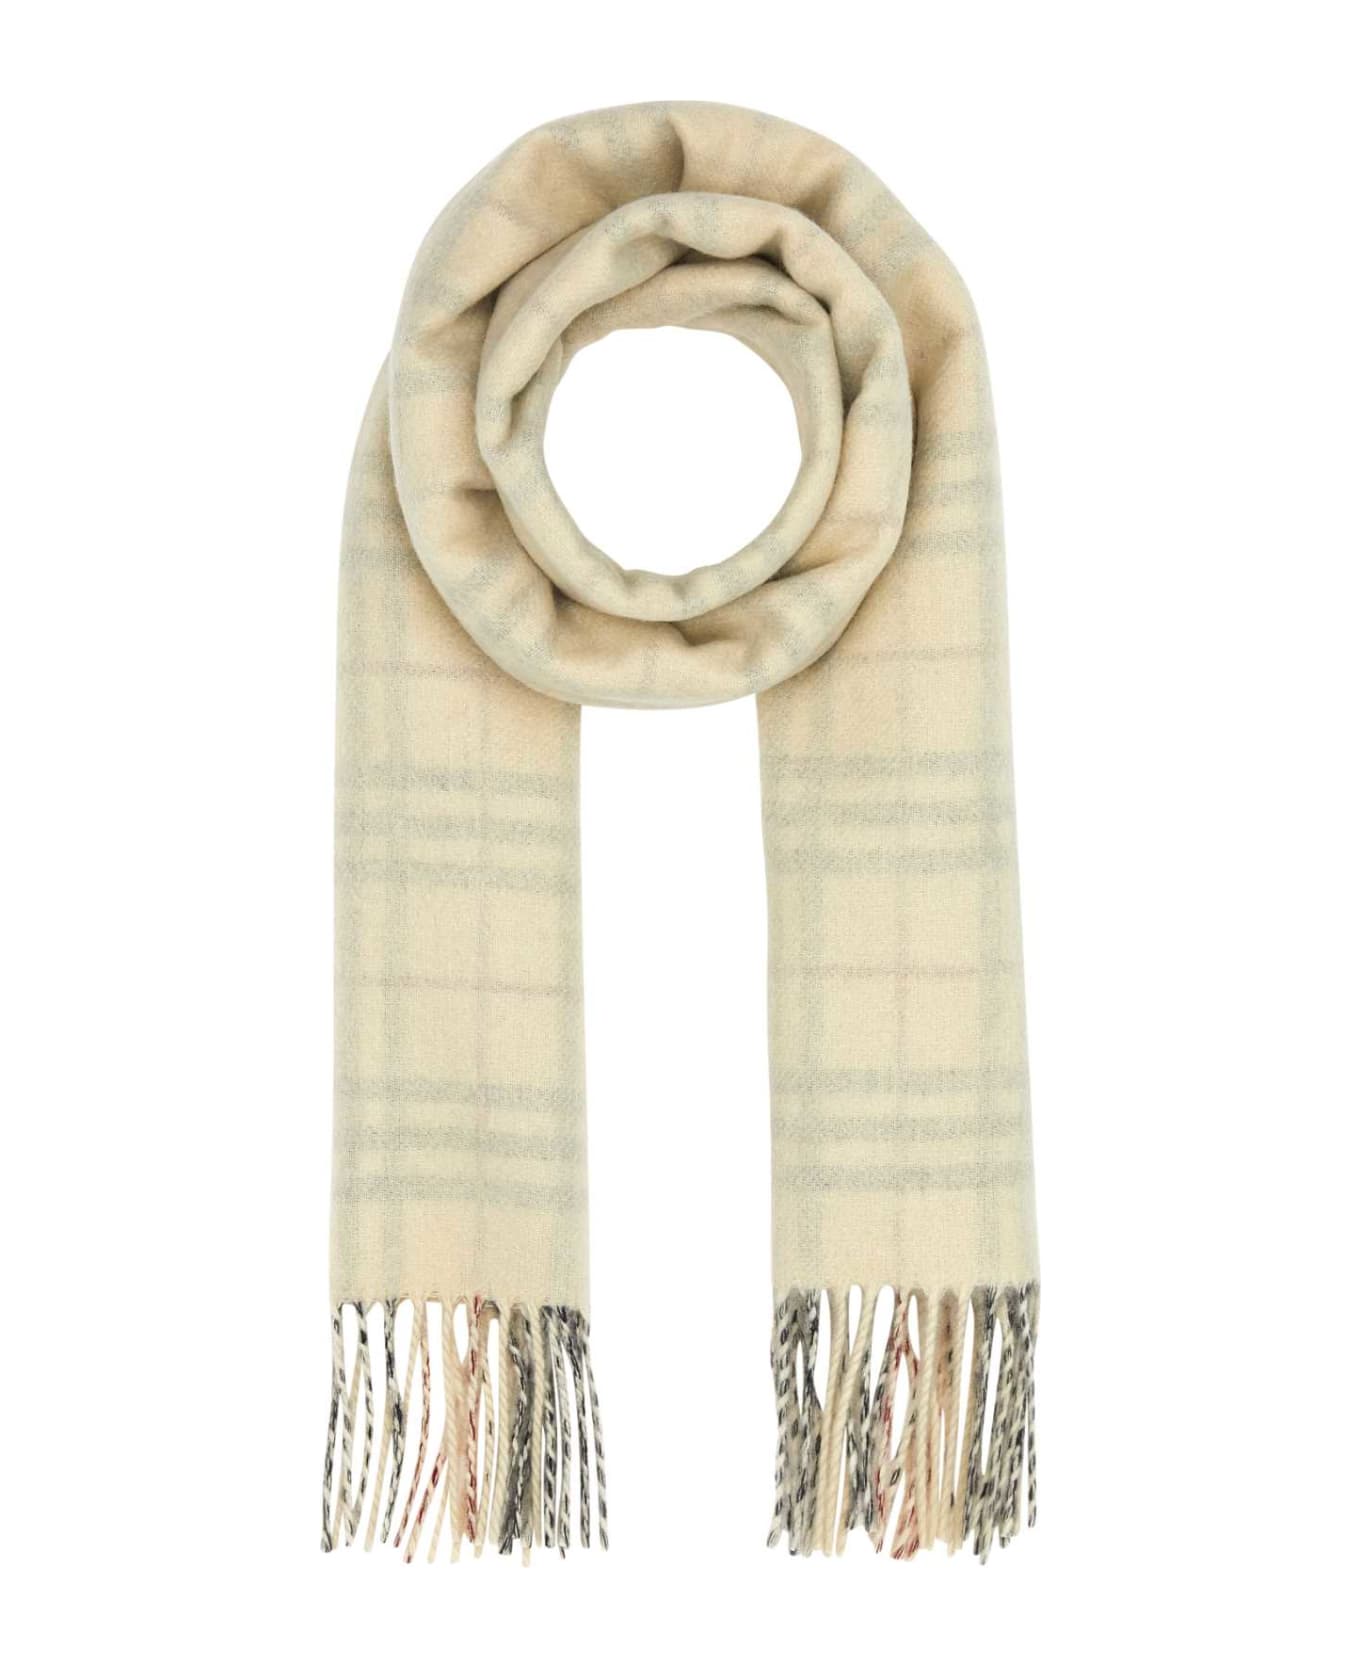 Burberry Embroidered Cashmere Scarf - STONE